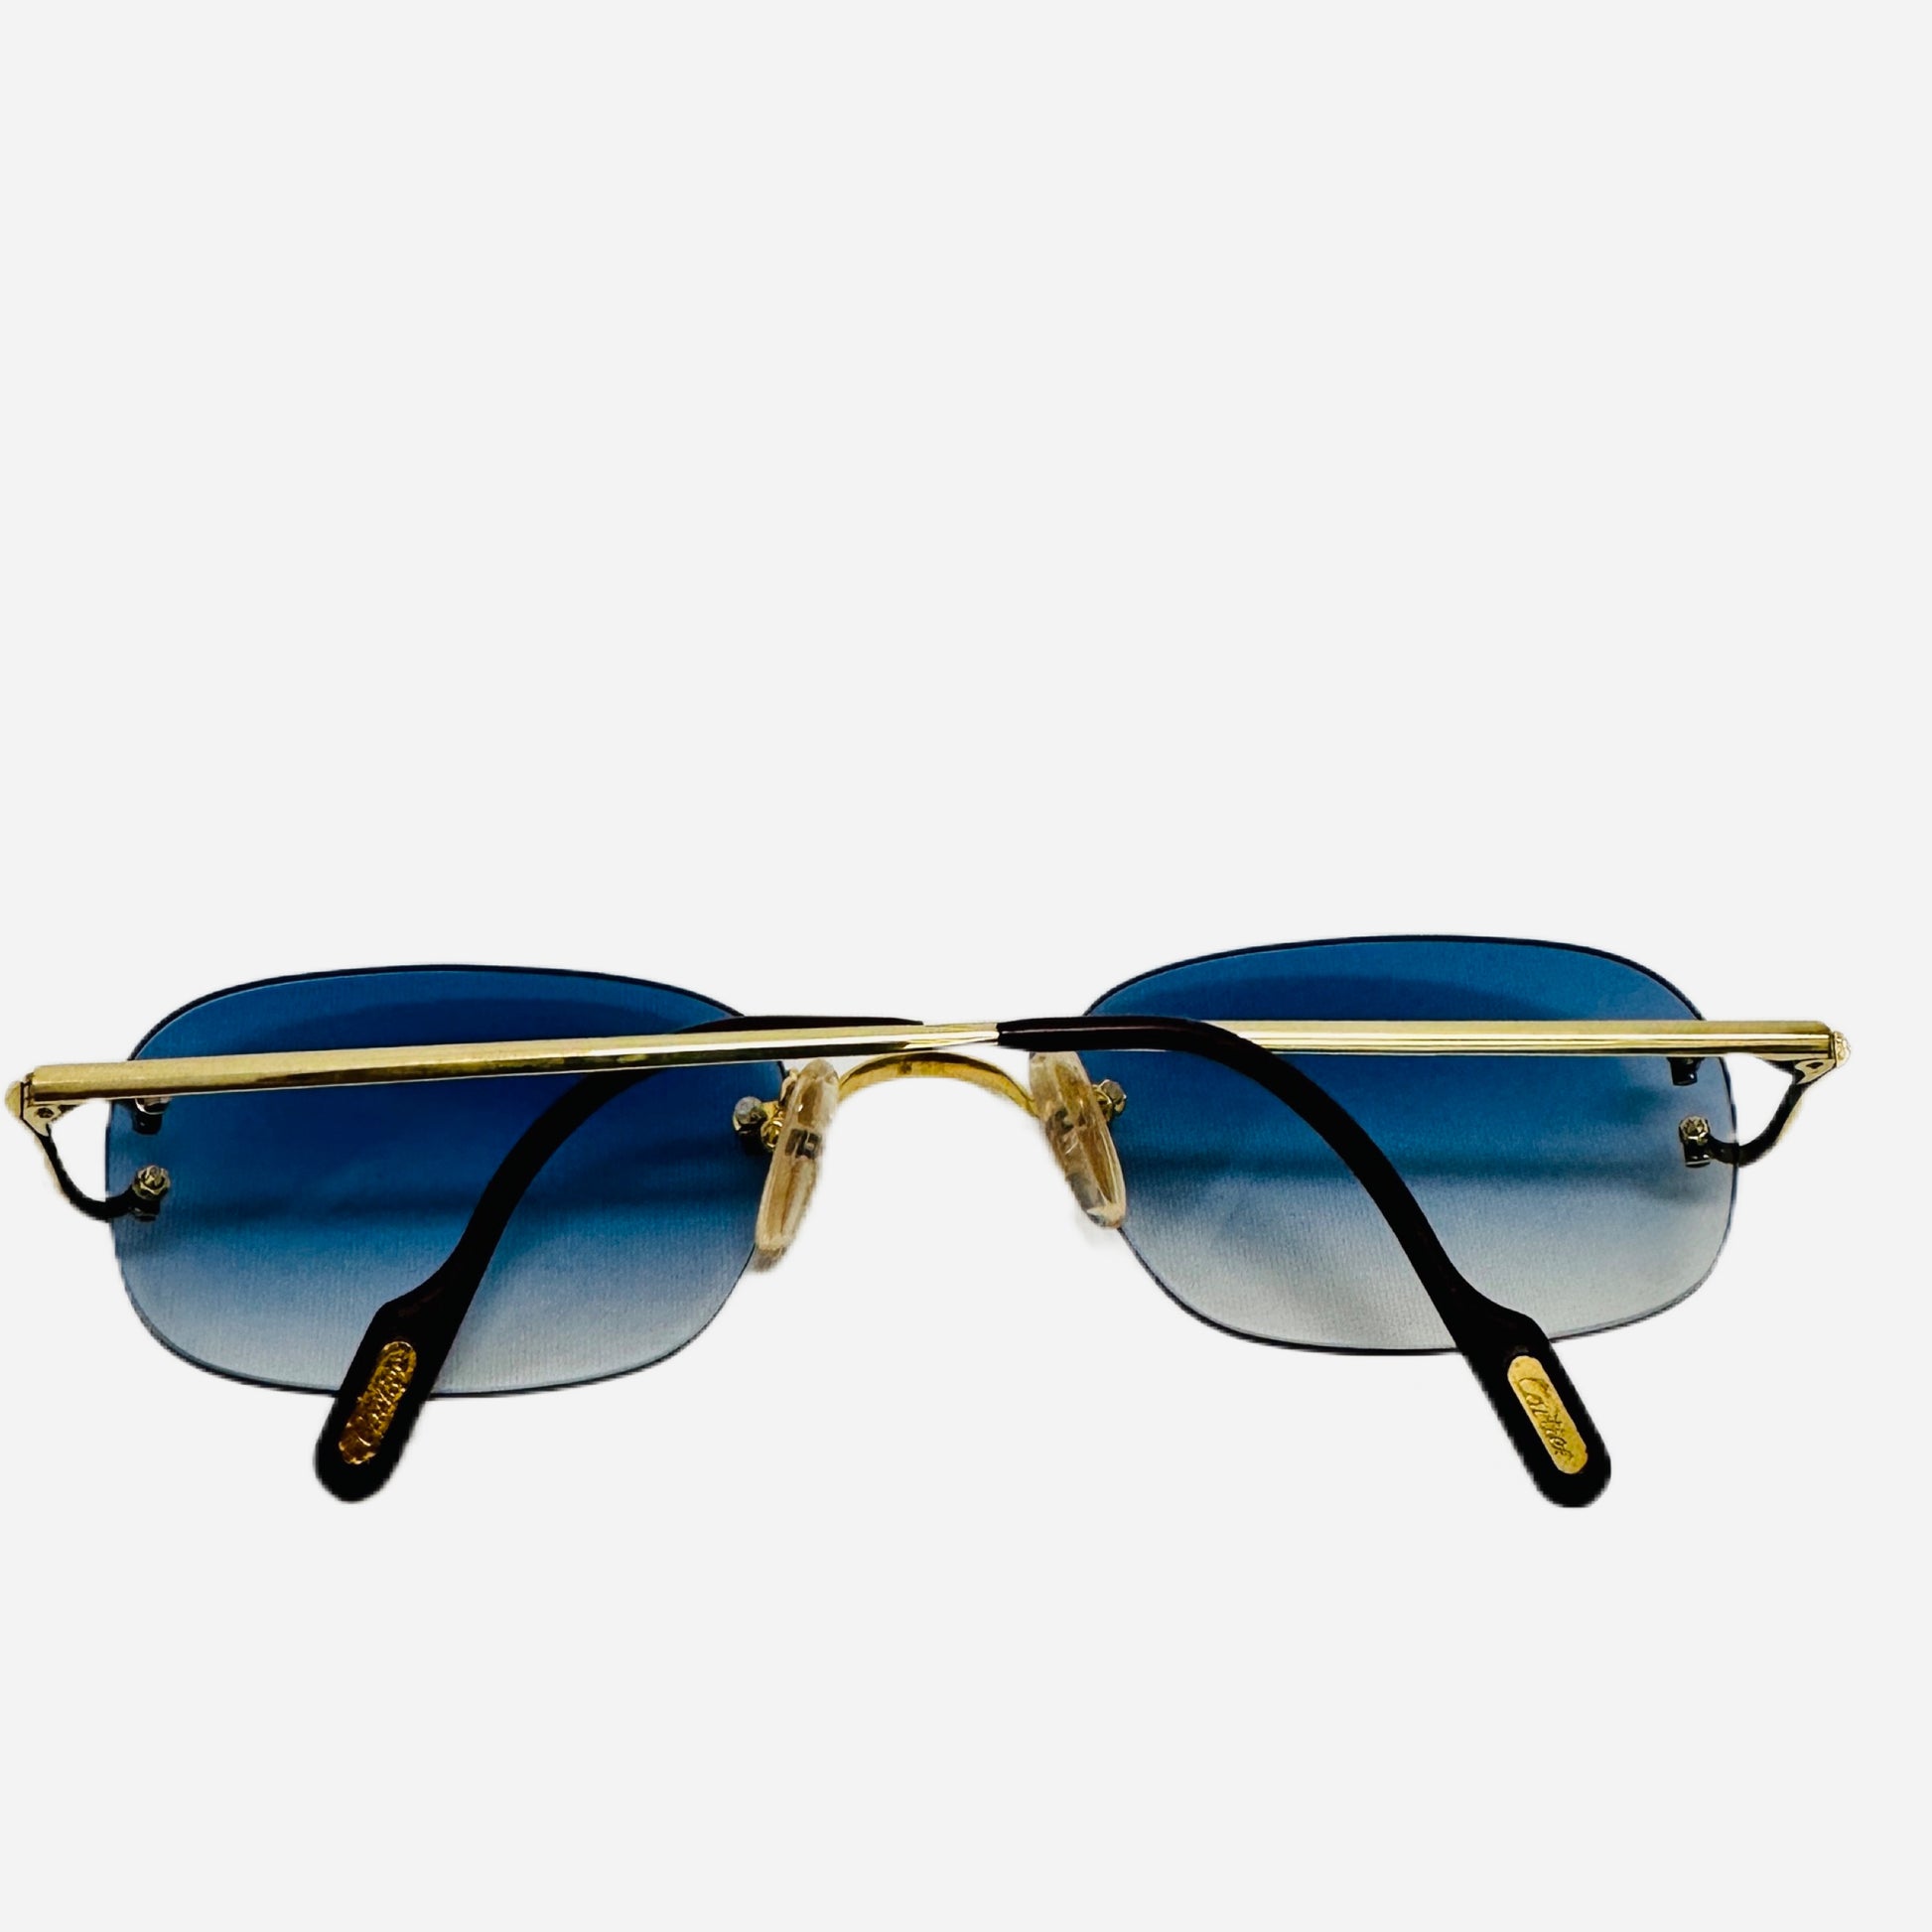 Vintage-Cartier-Big-C-Serrano-Sonnenbrille-Sunglasses-22CT-Carats-Gold-Plated-the-ssekers-back